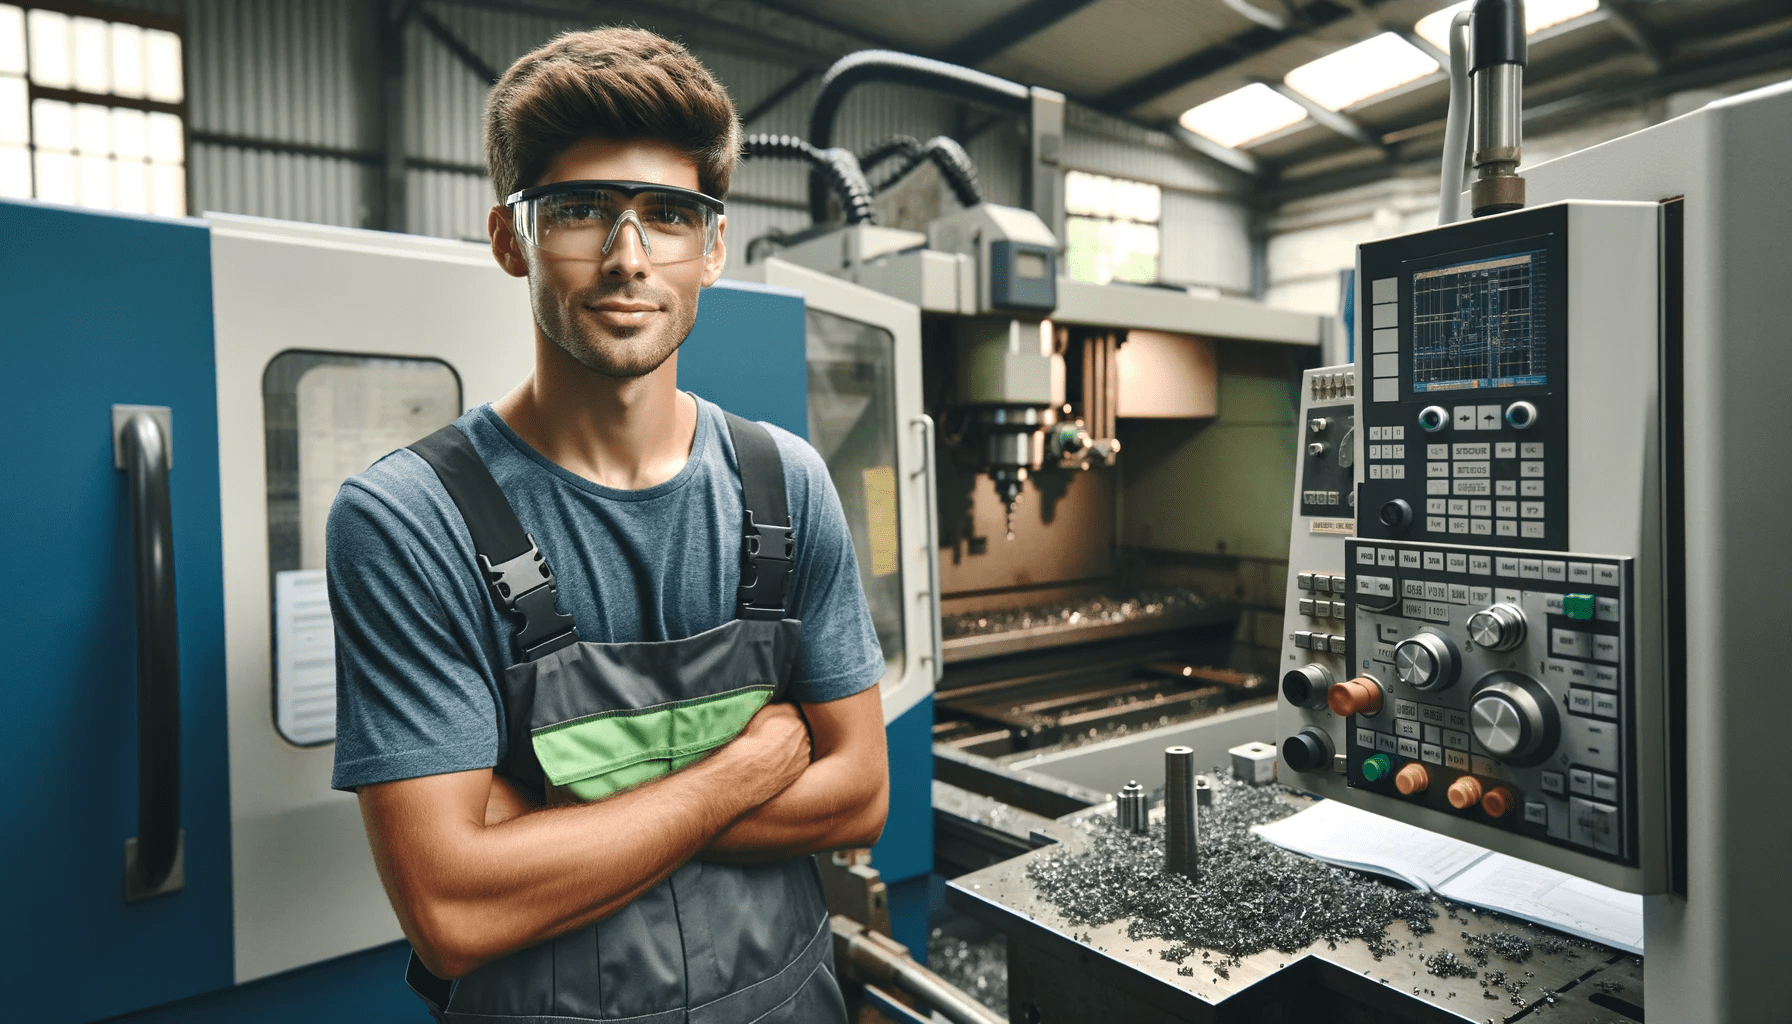 A Caucasian male CNC machinist wearing safety goggles and a blue work shirt, standing in a CNC workshop. The environment is industrial, with